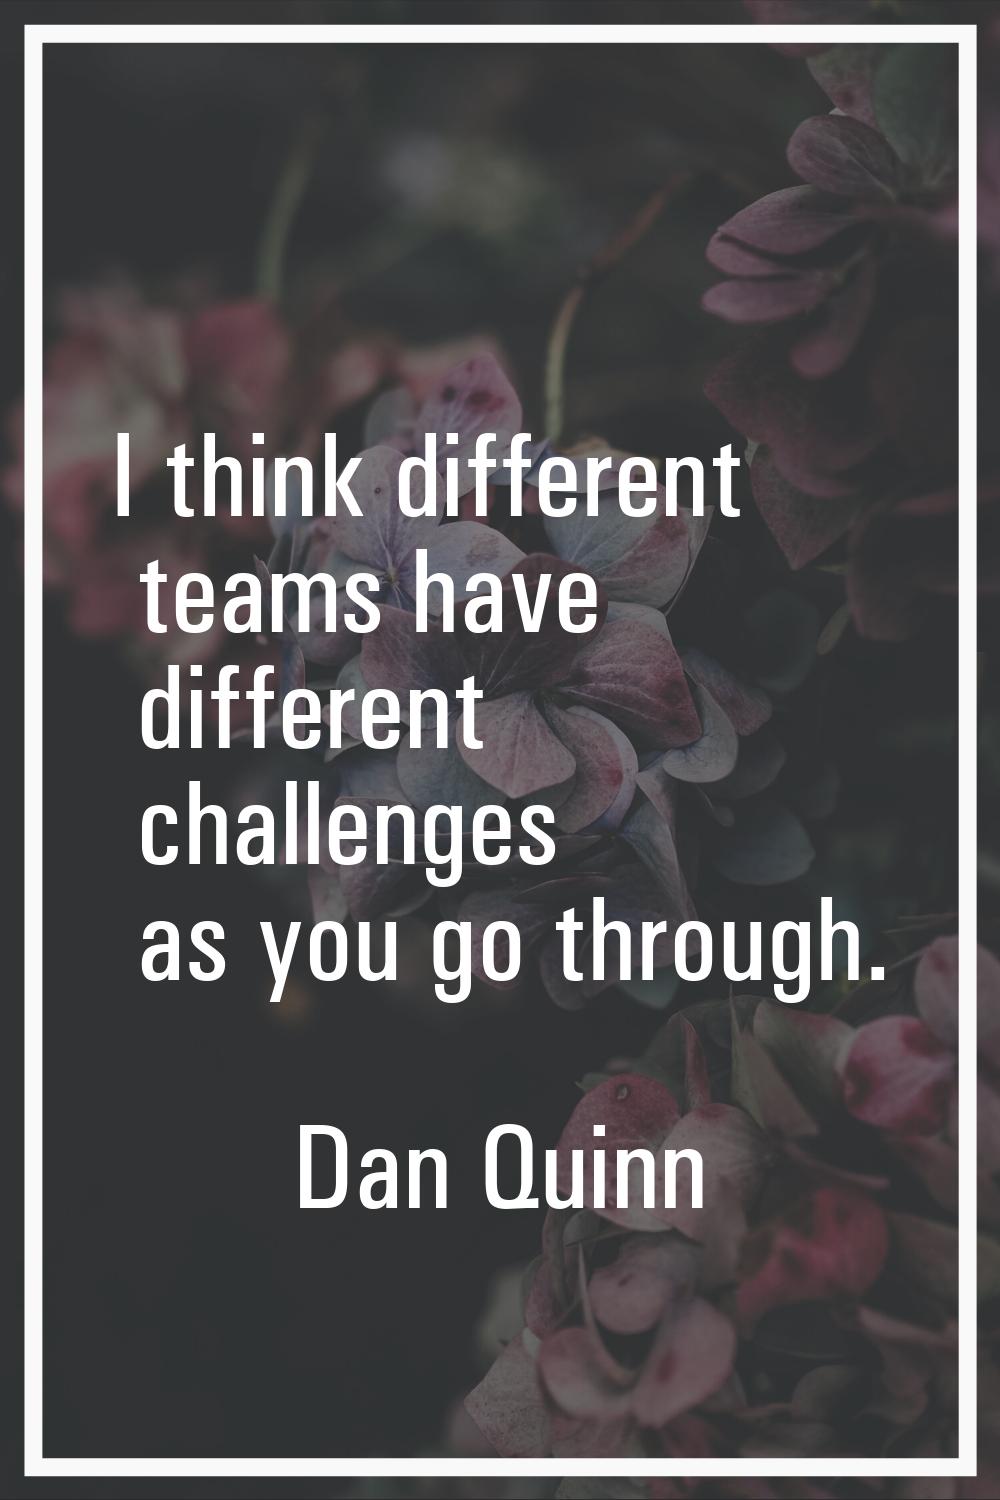 I think different teams have different challenges as you go through.